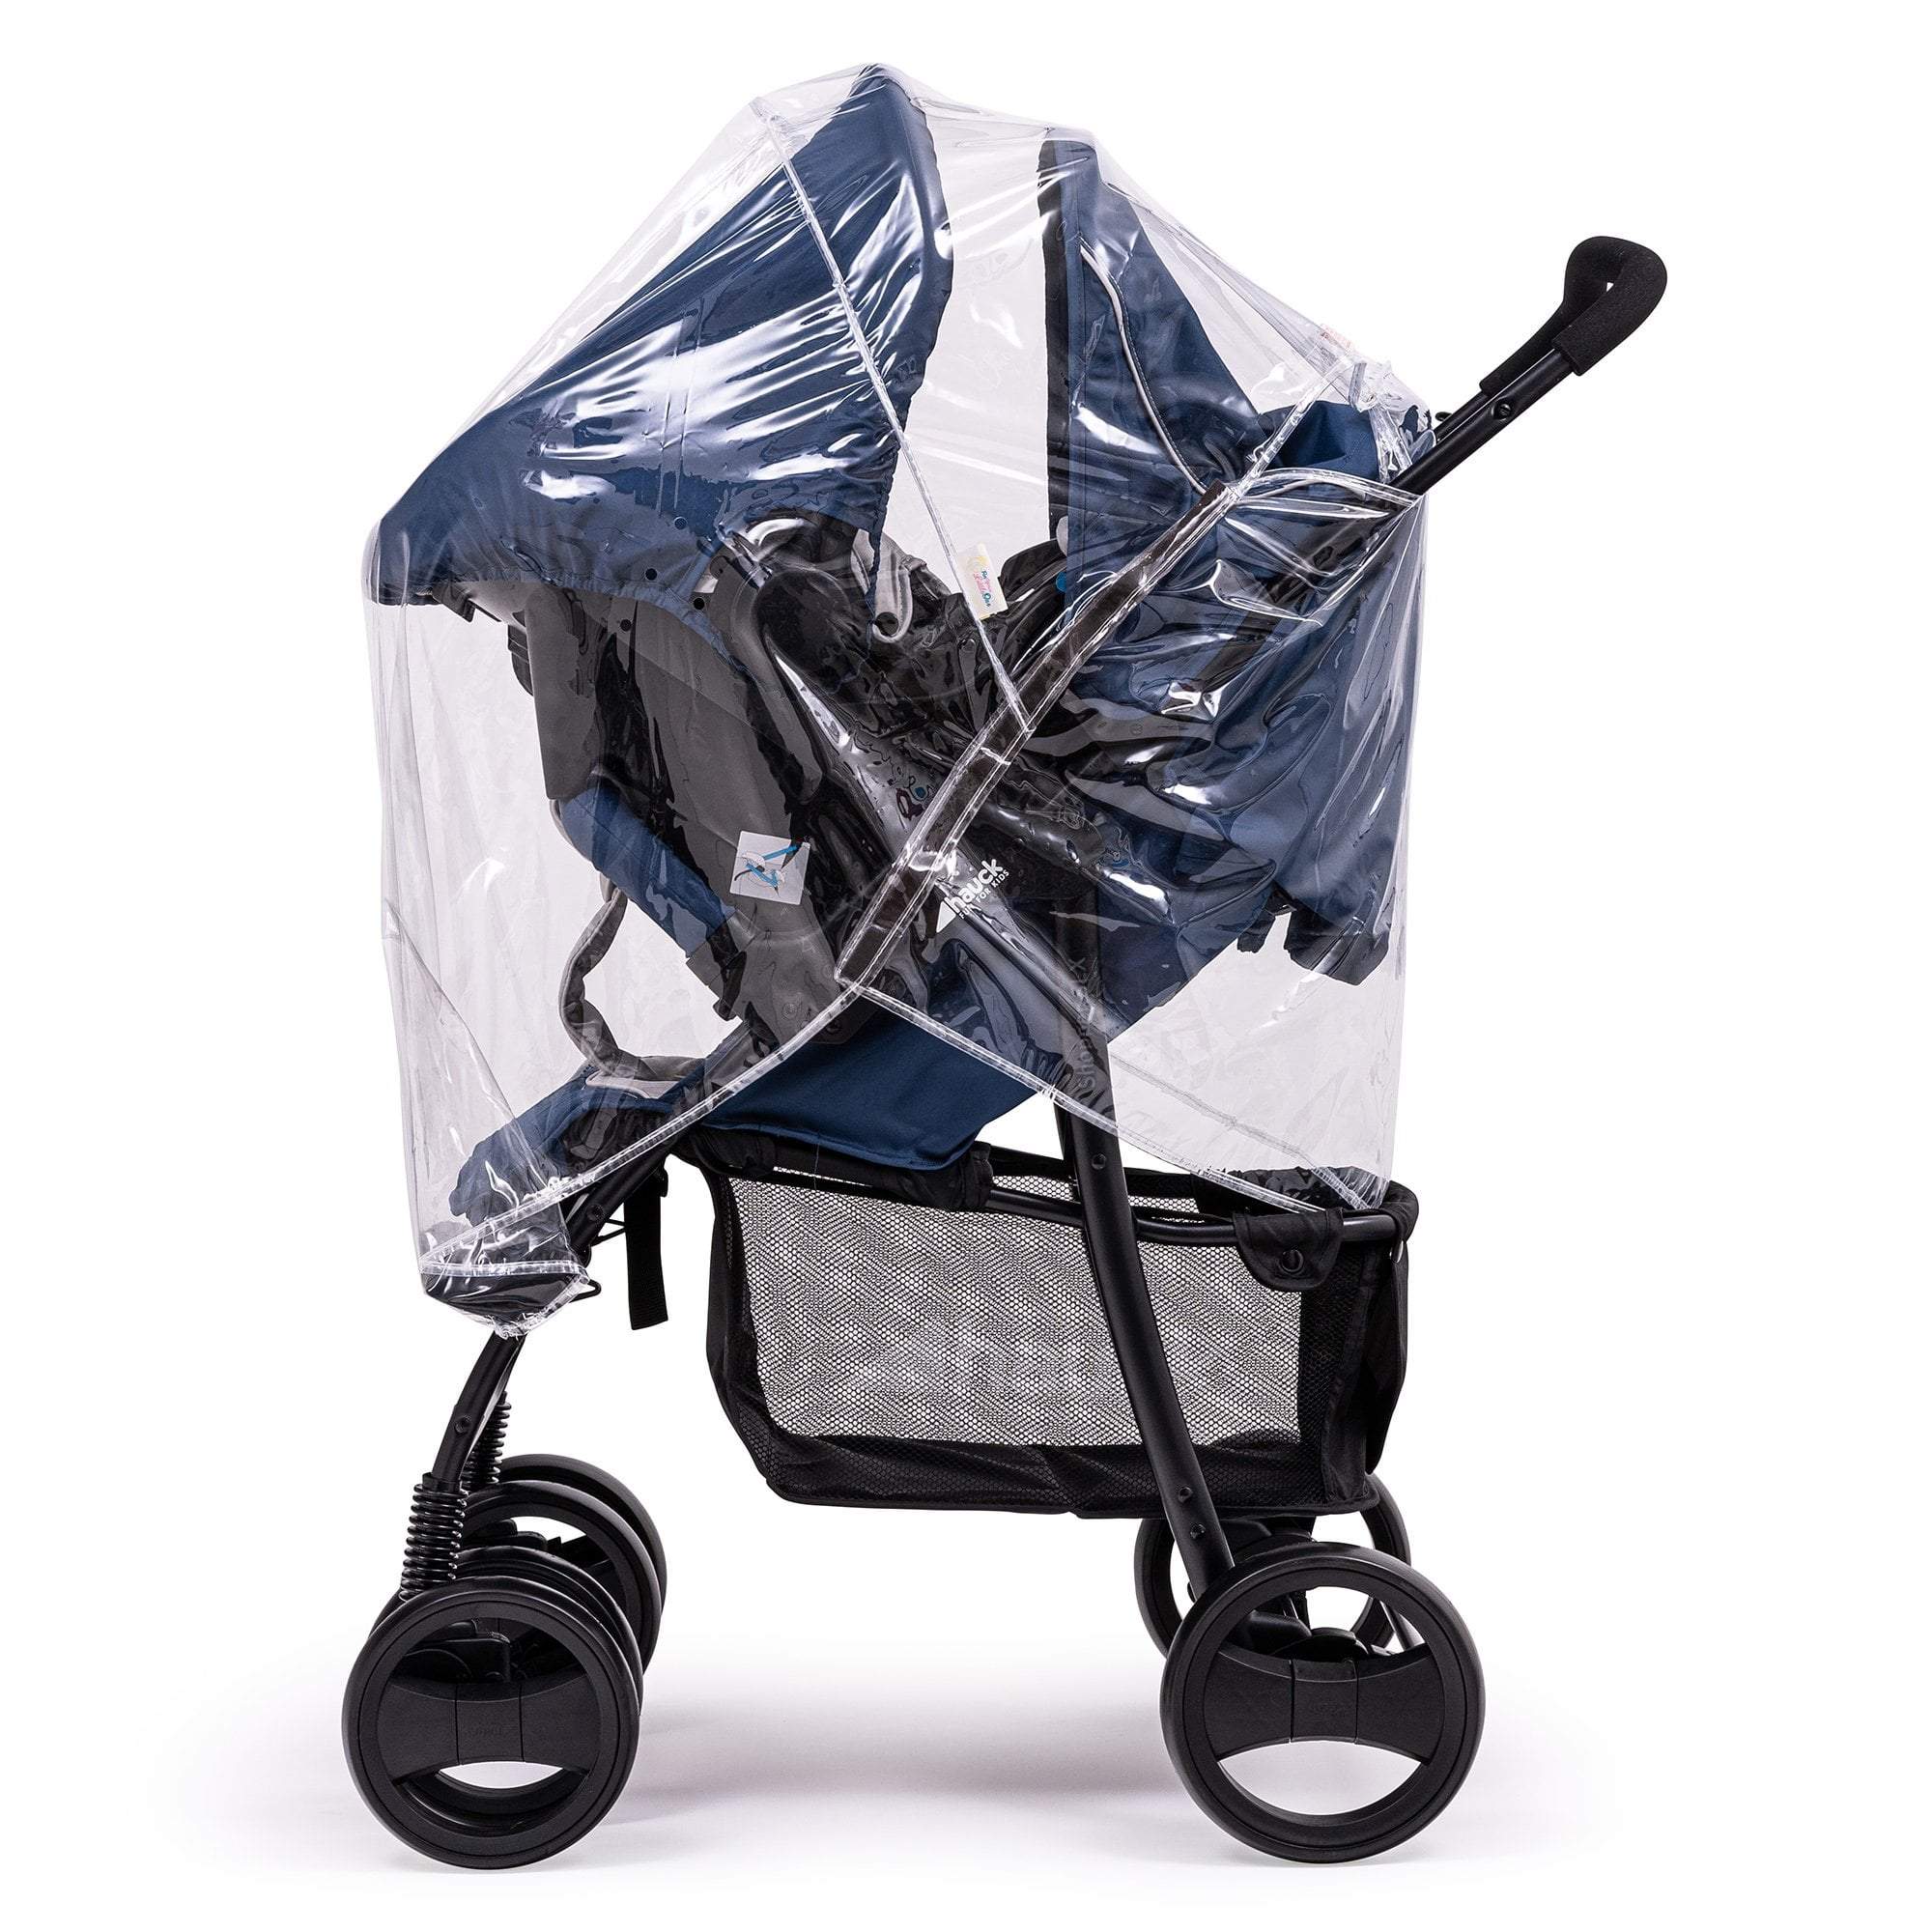 Travel System Raincover Compatible with NeoNato - Fits All Models - For Your Little One